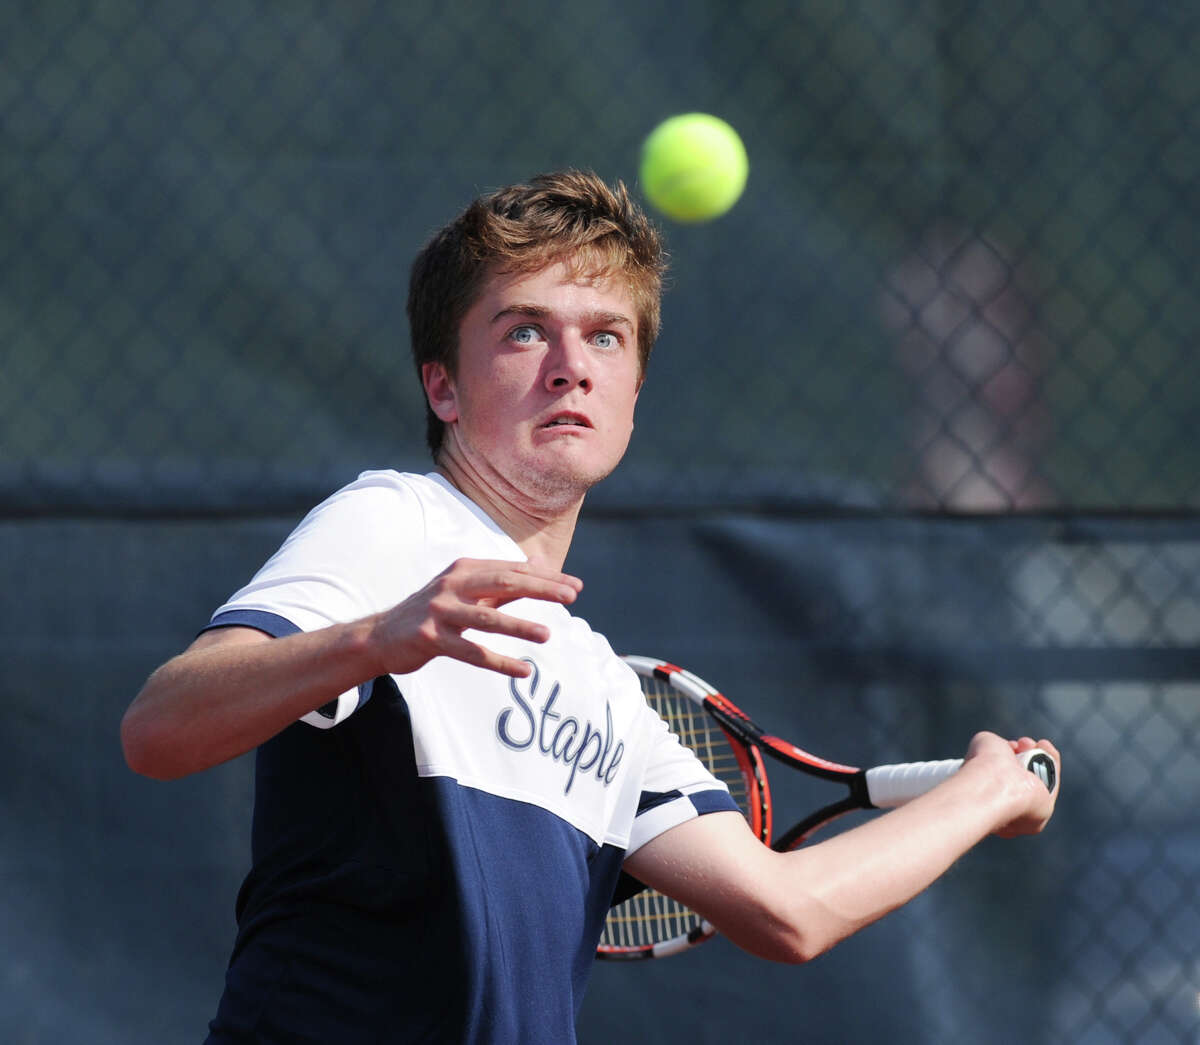 William Andrews of Staples hits during the match he lost to William Blumberg of Greenwich during the FCIAC boys high school championship tennis match between Greenwich High School and Staples High School at Wilton High School, Conn., Wednesday, May 25, 2016. Staples beat Greenwich 4-3 to take the championship.